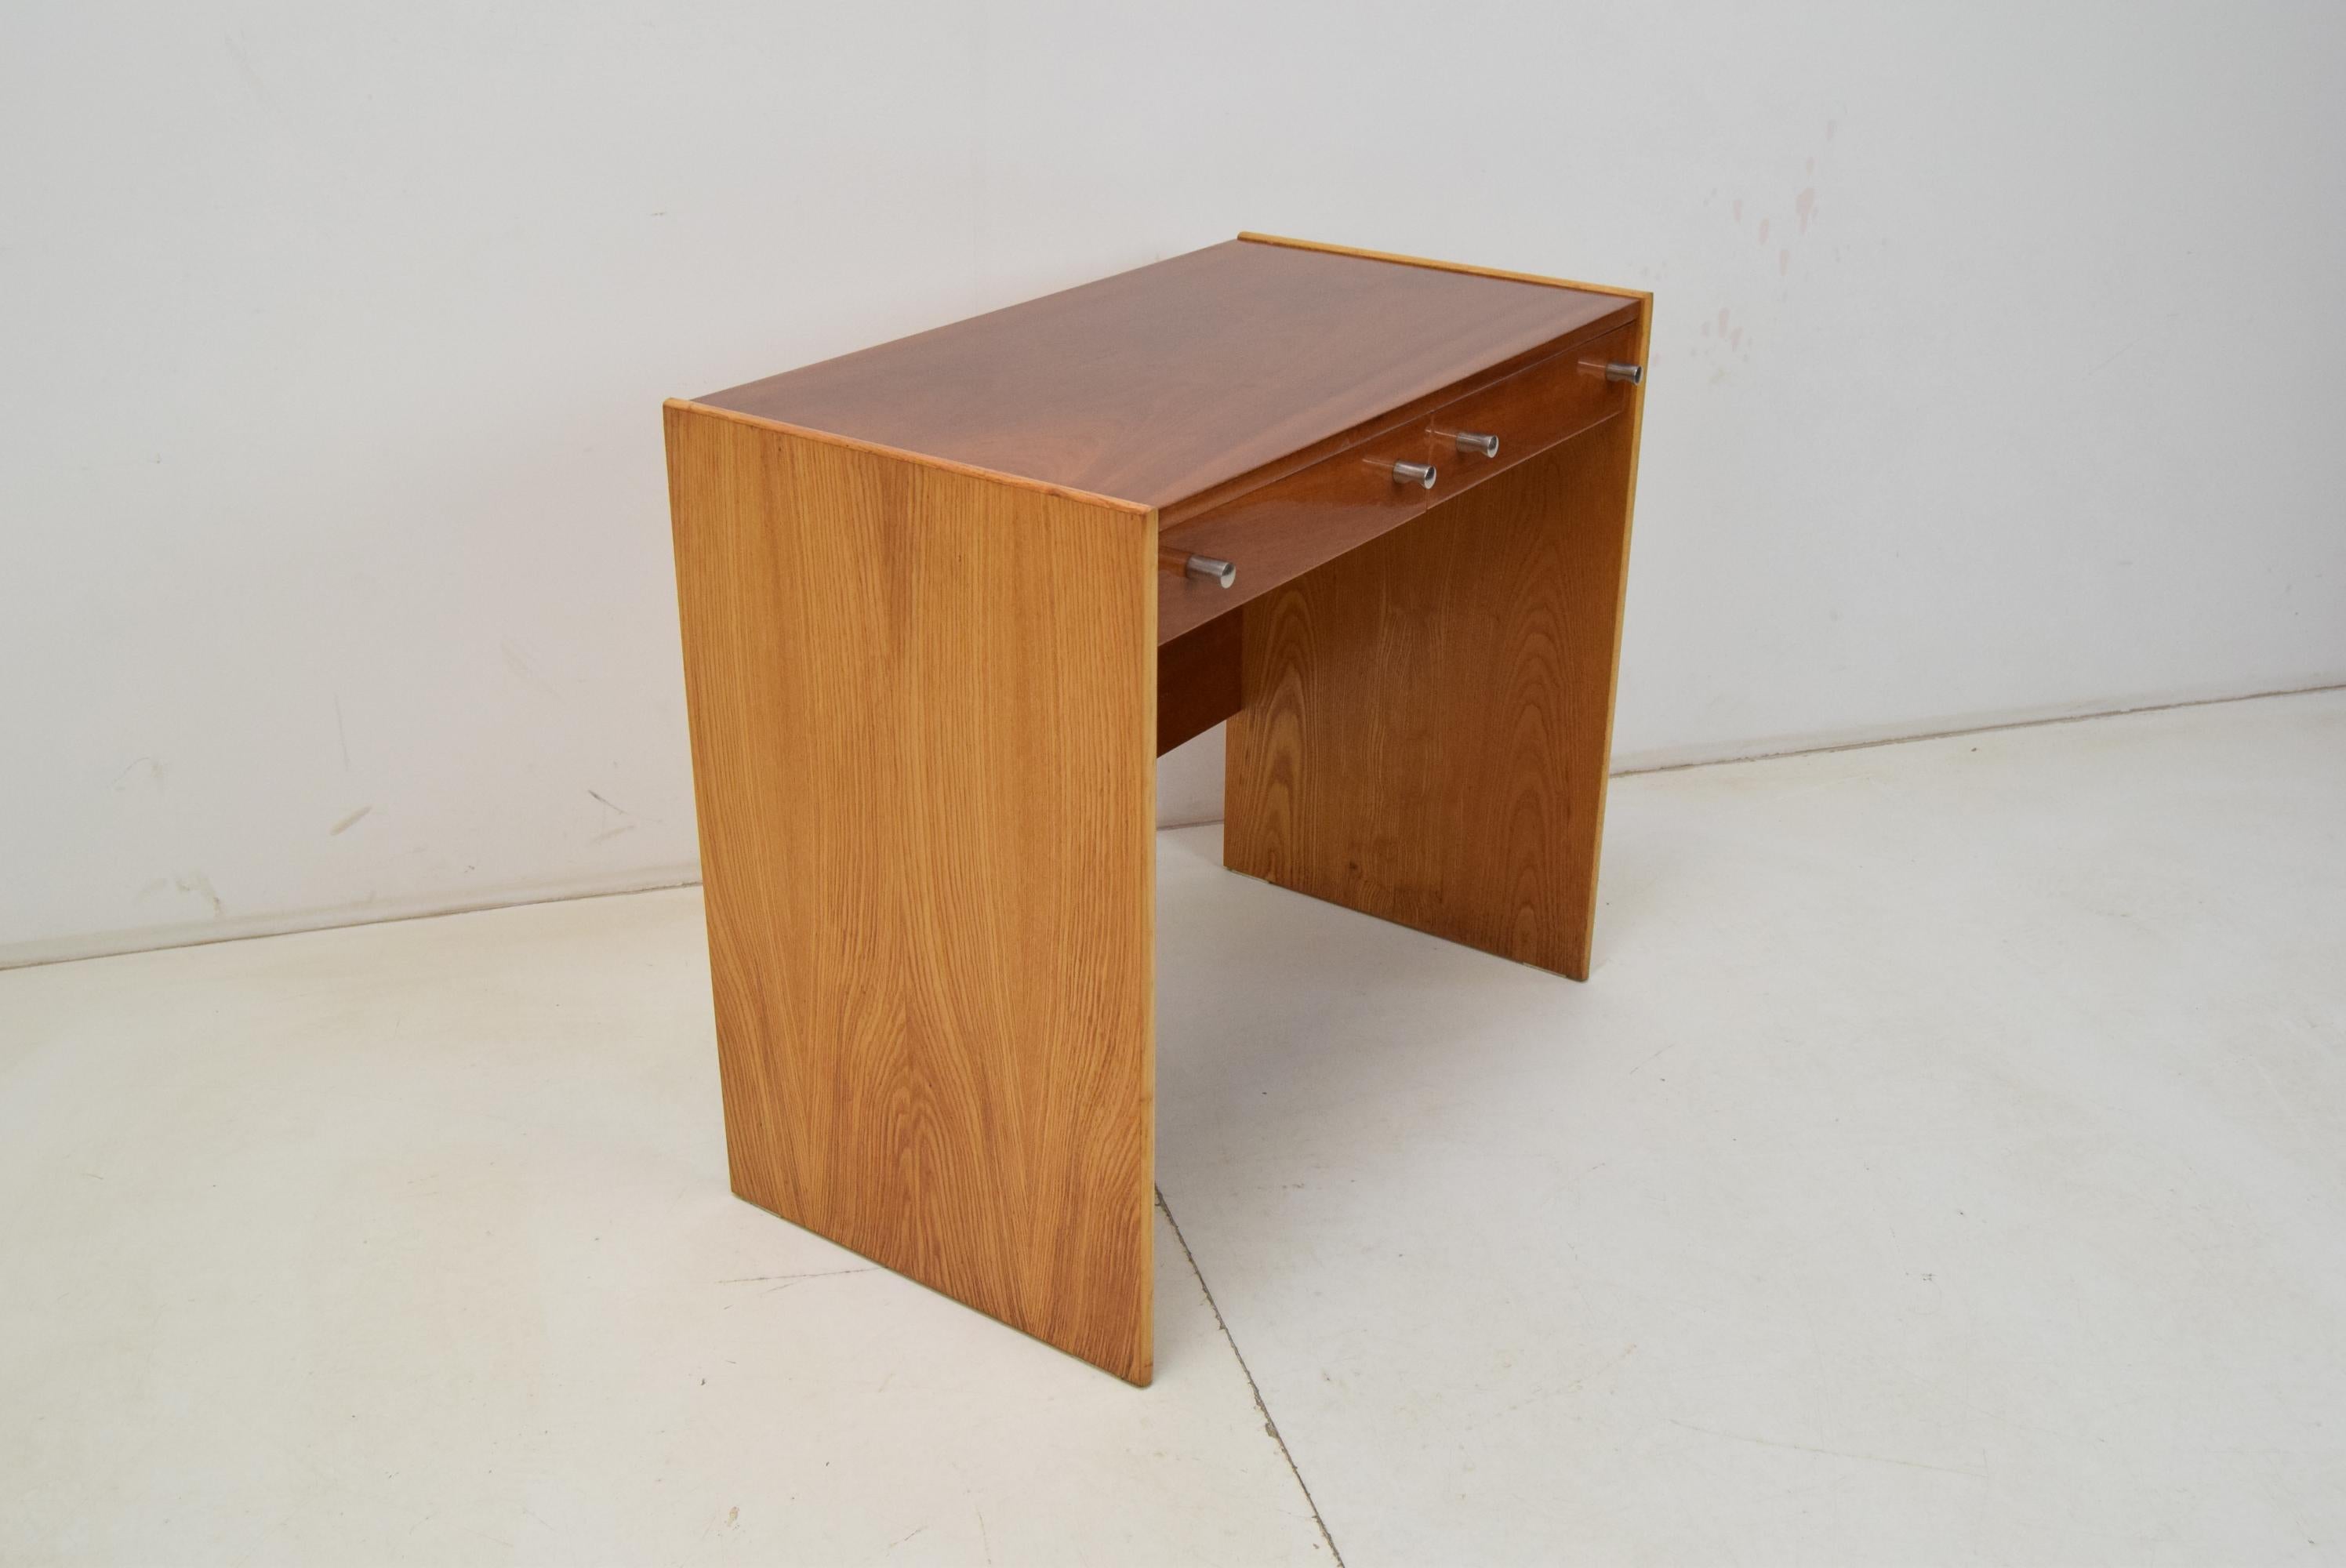 Lady's Desk or Vanity or Side Table in Mahogany / Up Zavody, 1970s For Sale 6